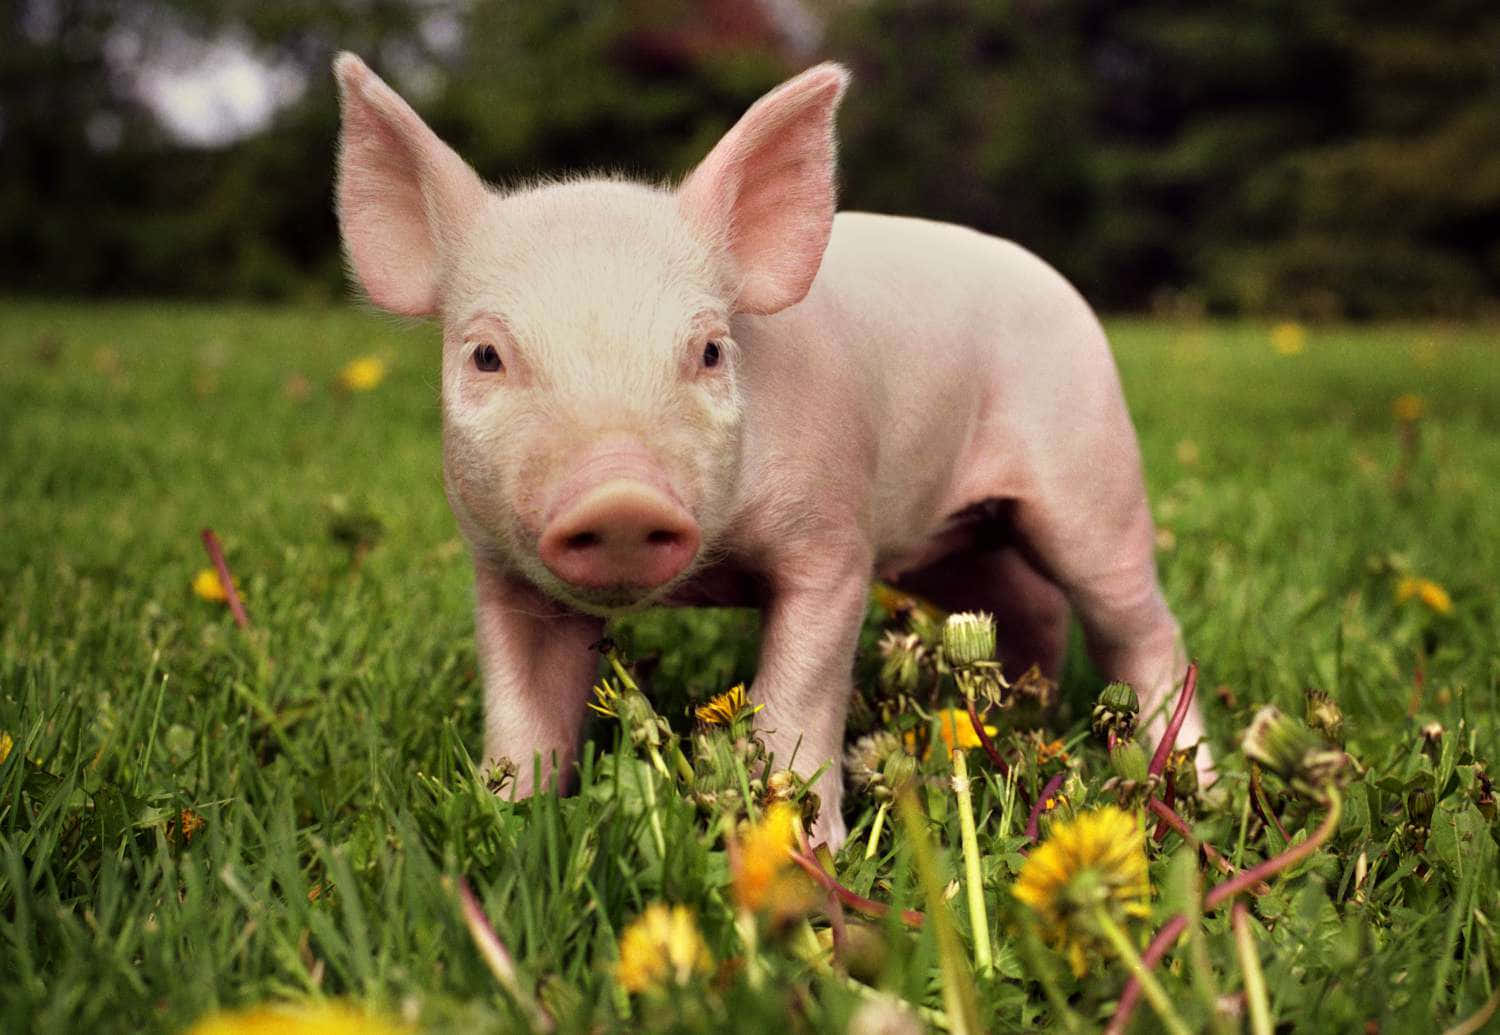 "This little piggy is just too cute!"